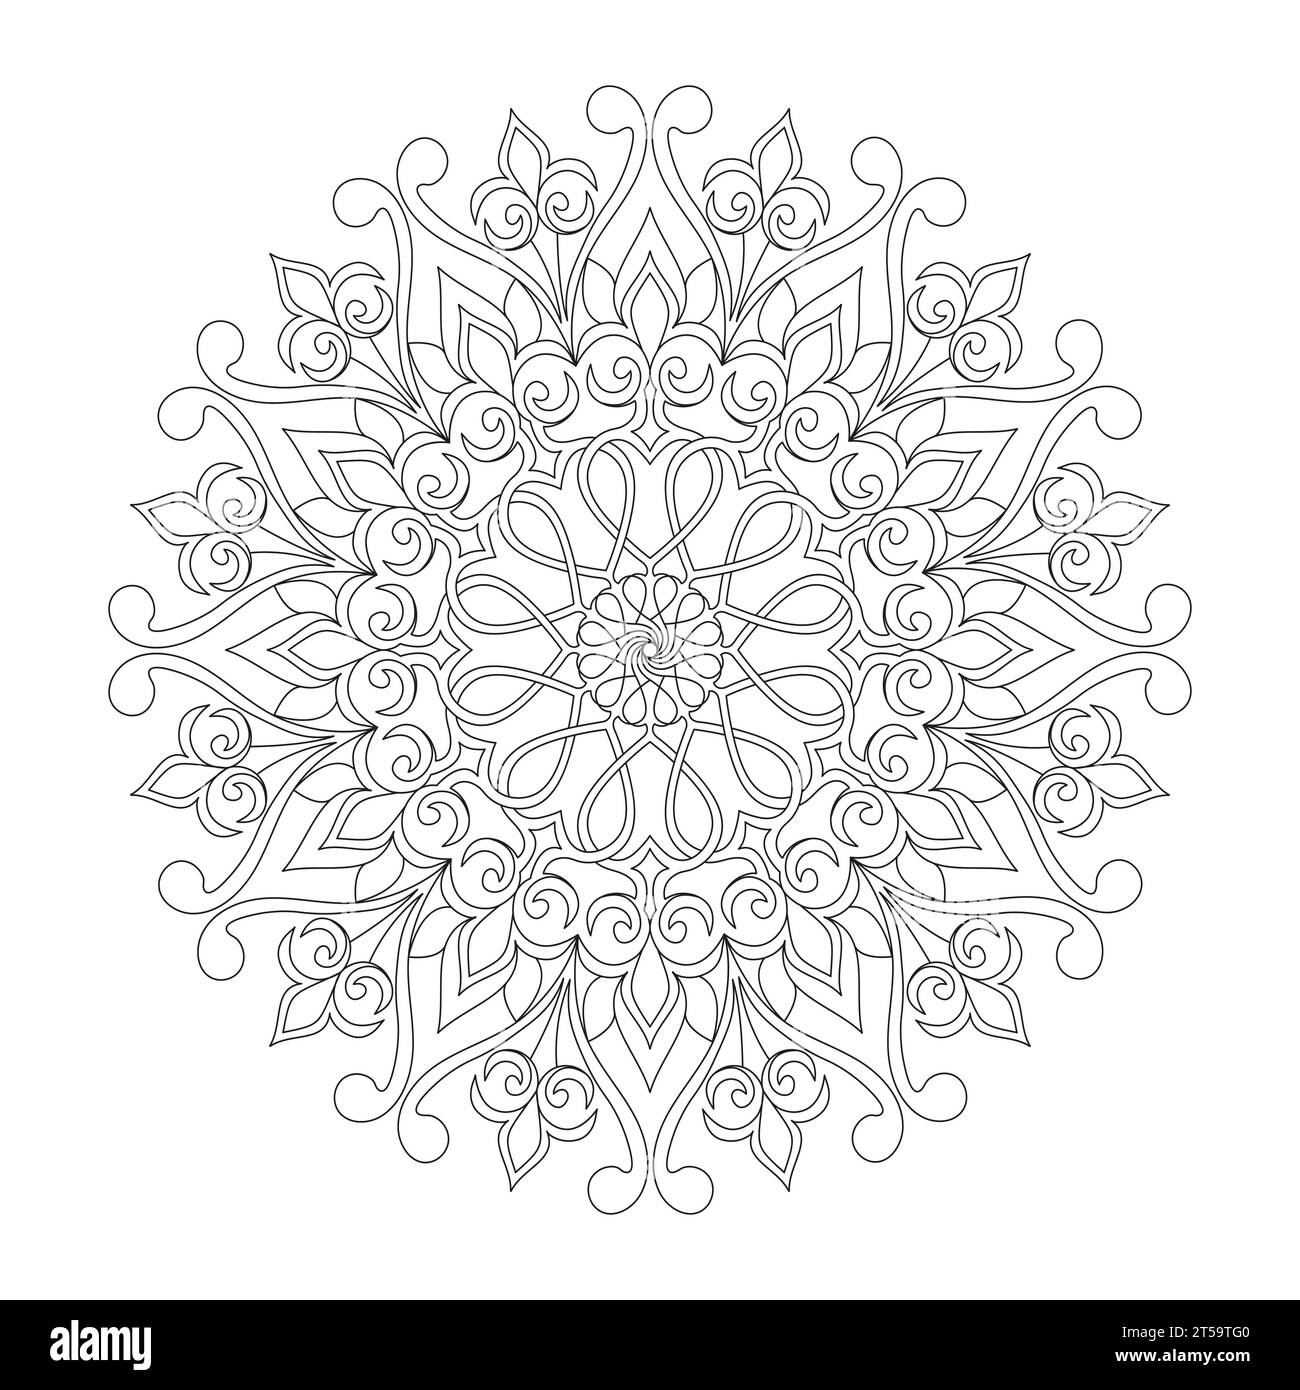 Celtic enchanted harmony adult mandala colouring book page for KDP book interior. Peaceful Petals, Ability to Relax, Brain Experiences, Harmonious Have Stock Vector